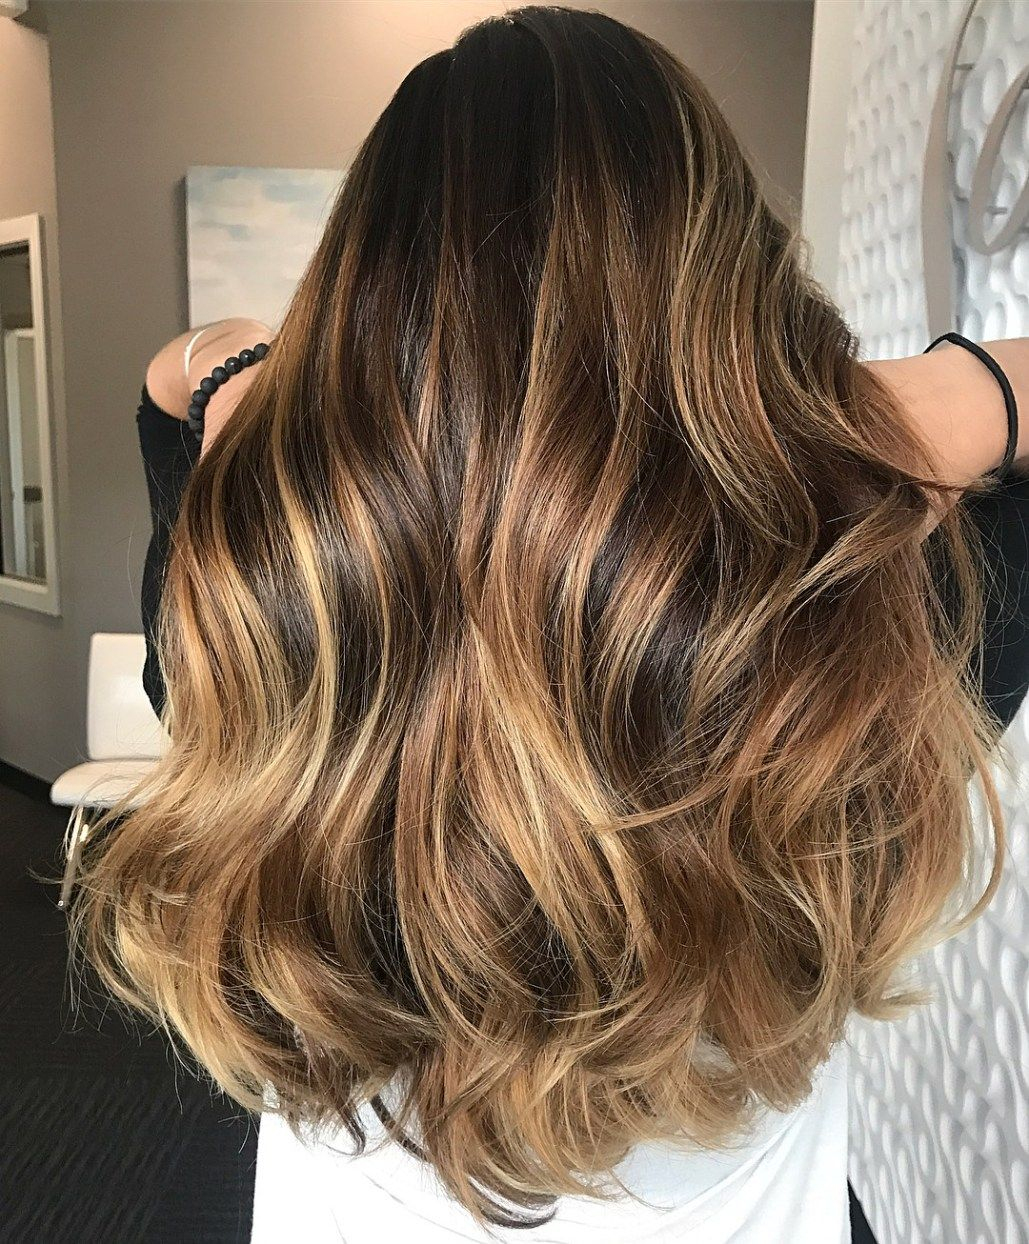 20 Honey Balayage Pictures That Really Inspire To Try Highlights destiné Balayage Blond Miel fascinant 